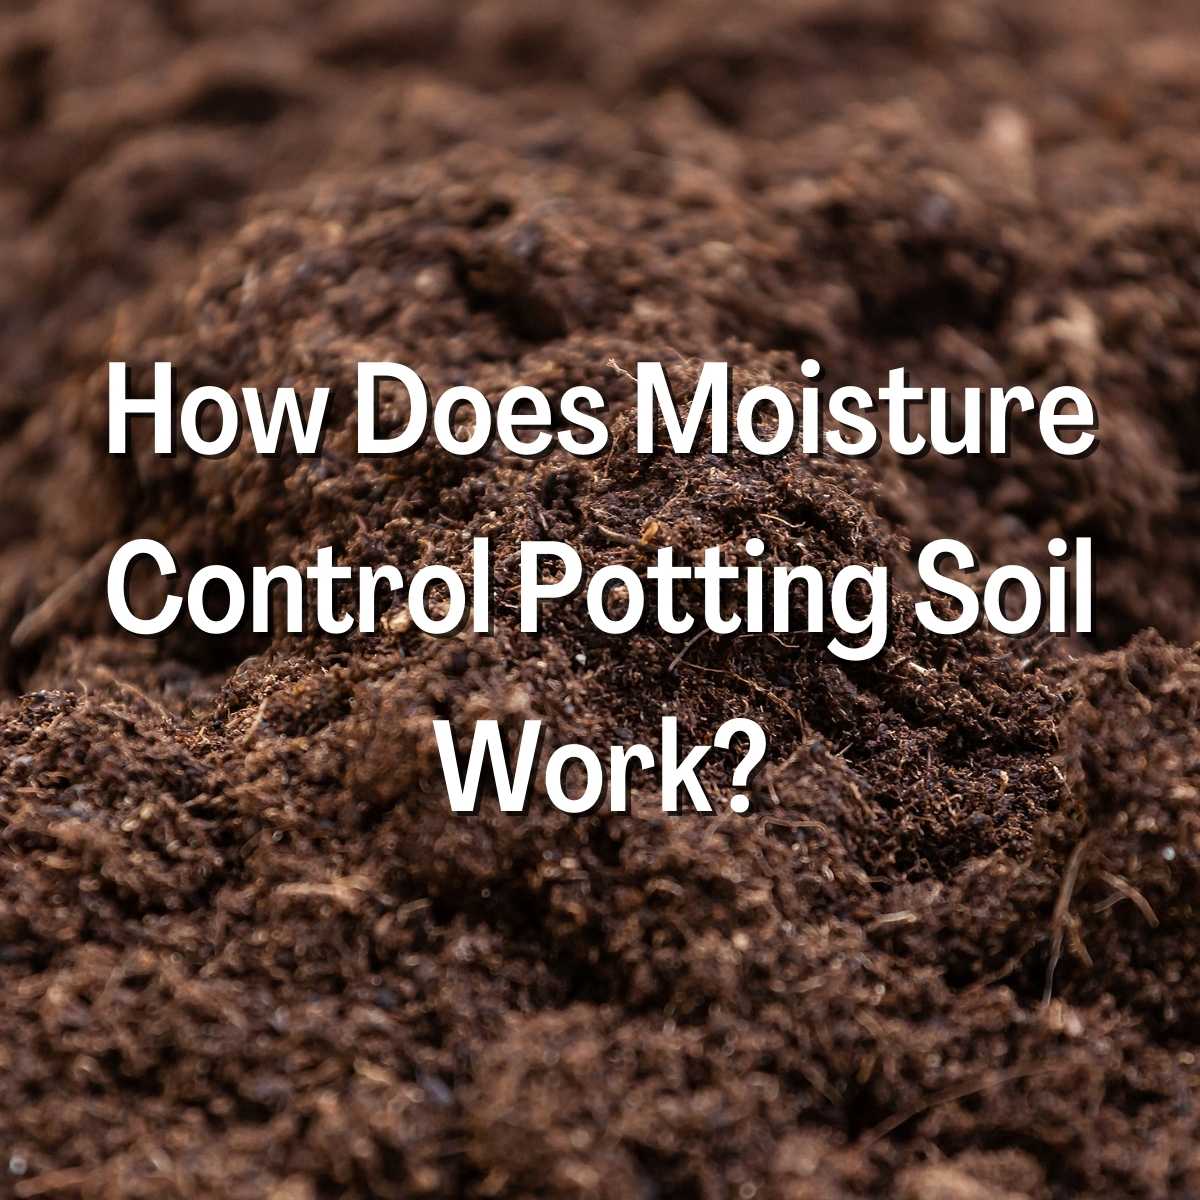 How Does Moisture Control Potting Soil Work